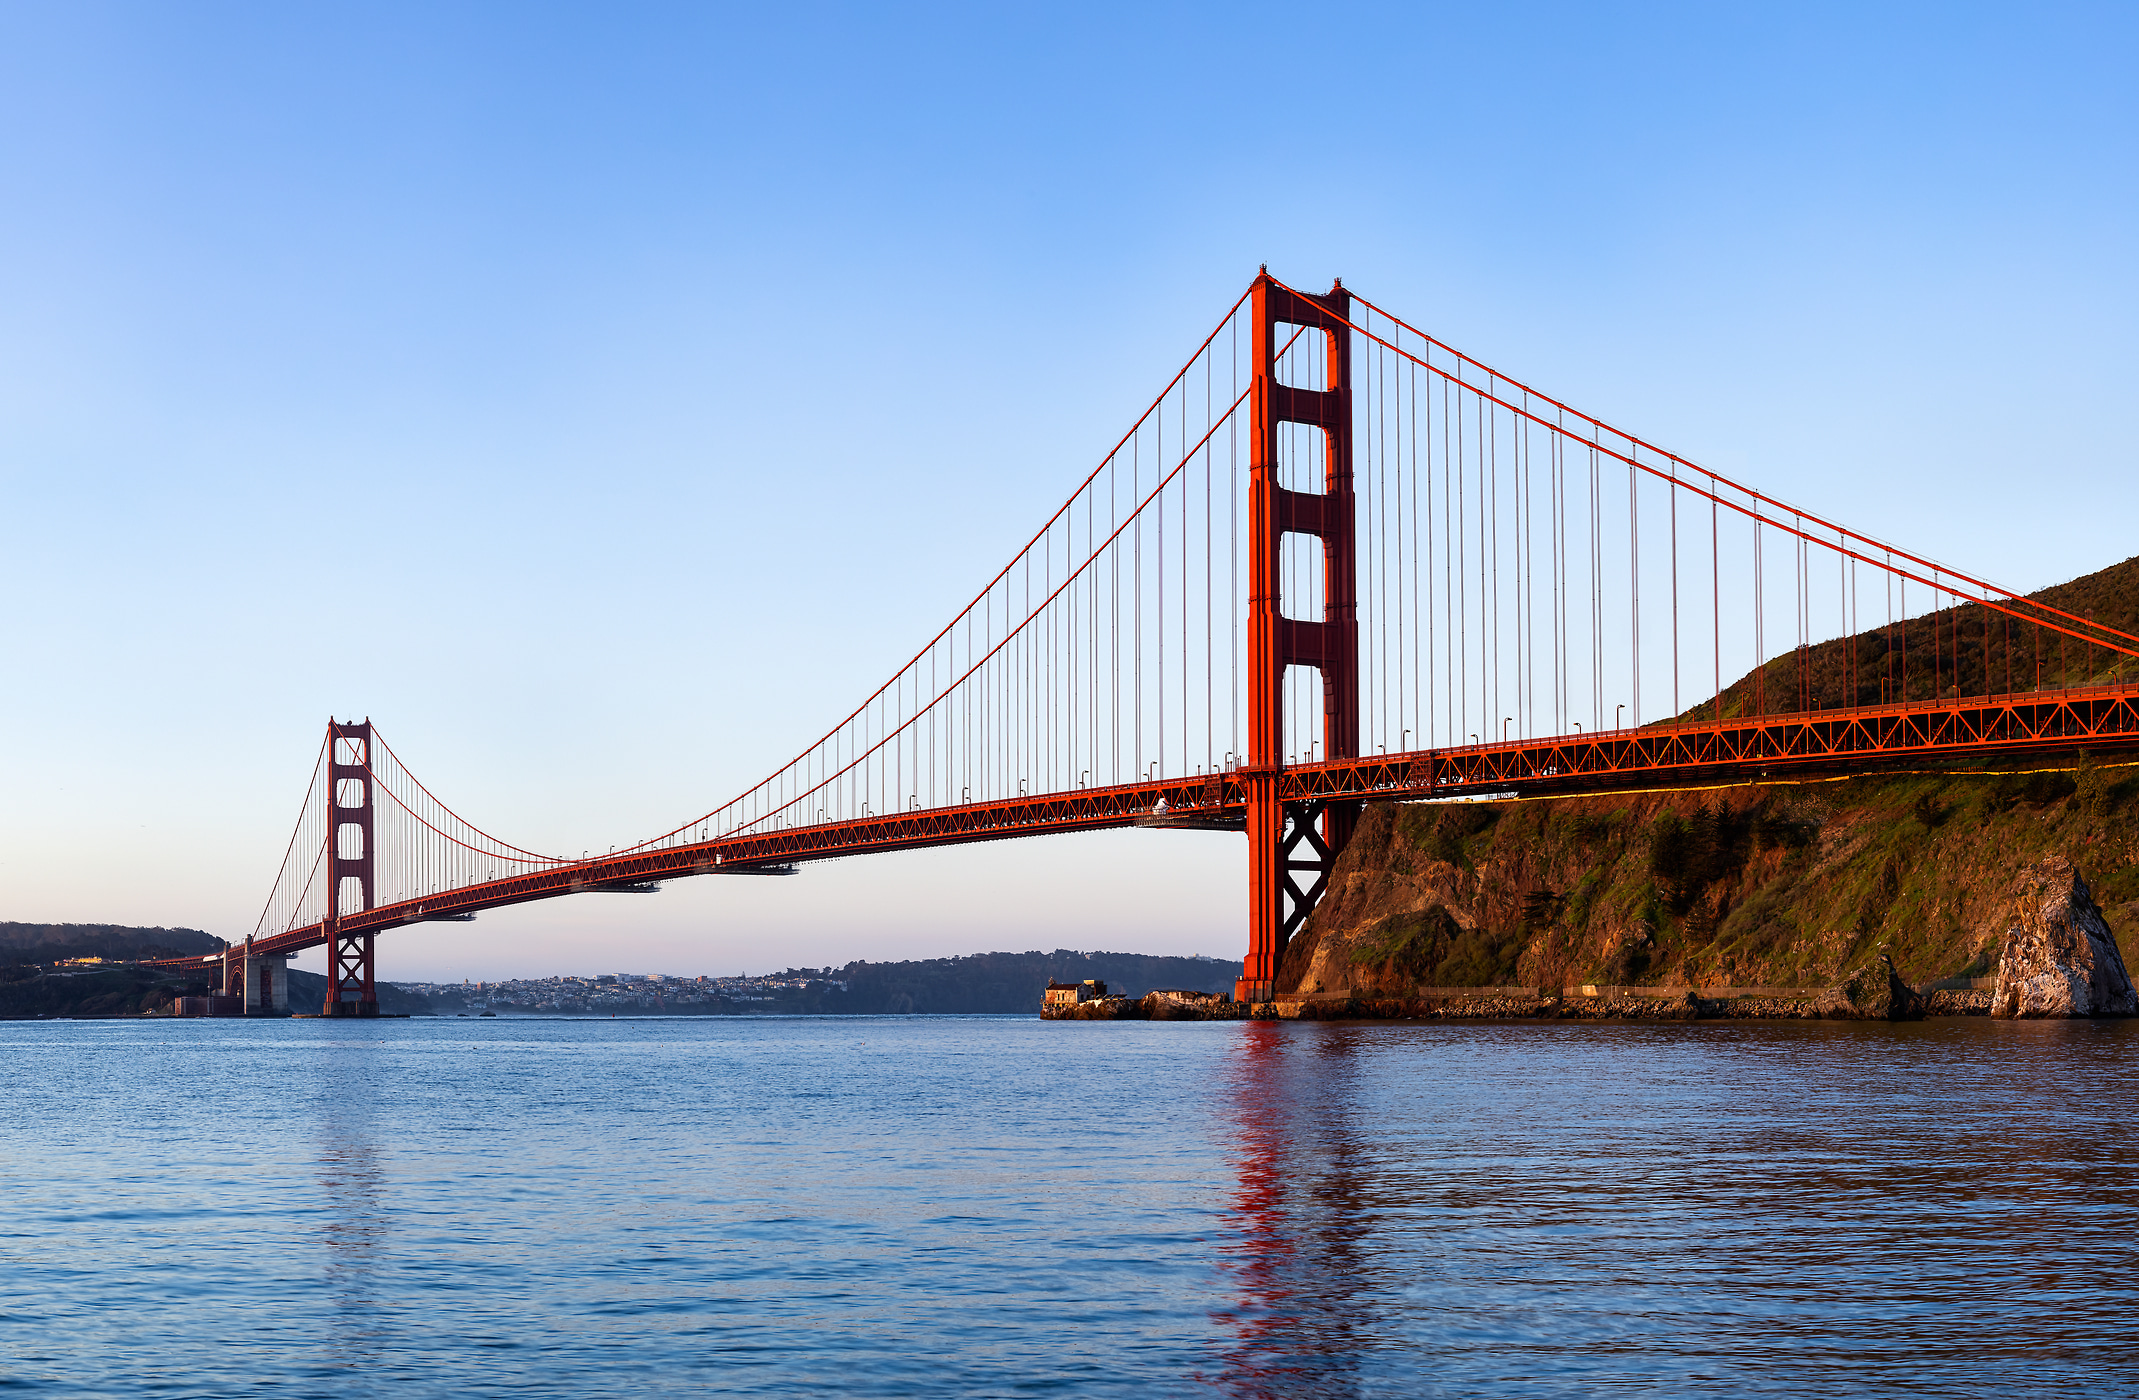 248 megapixels! A very high resolution, large-format VAST photo print of the Golden Gate Bridge; architecture photograph created by Nicholas Gonzales in Horseshoe Bay, Sausalito, California.